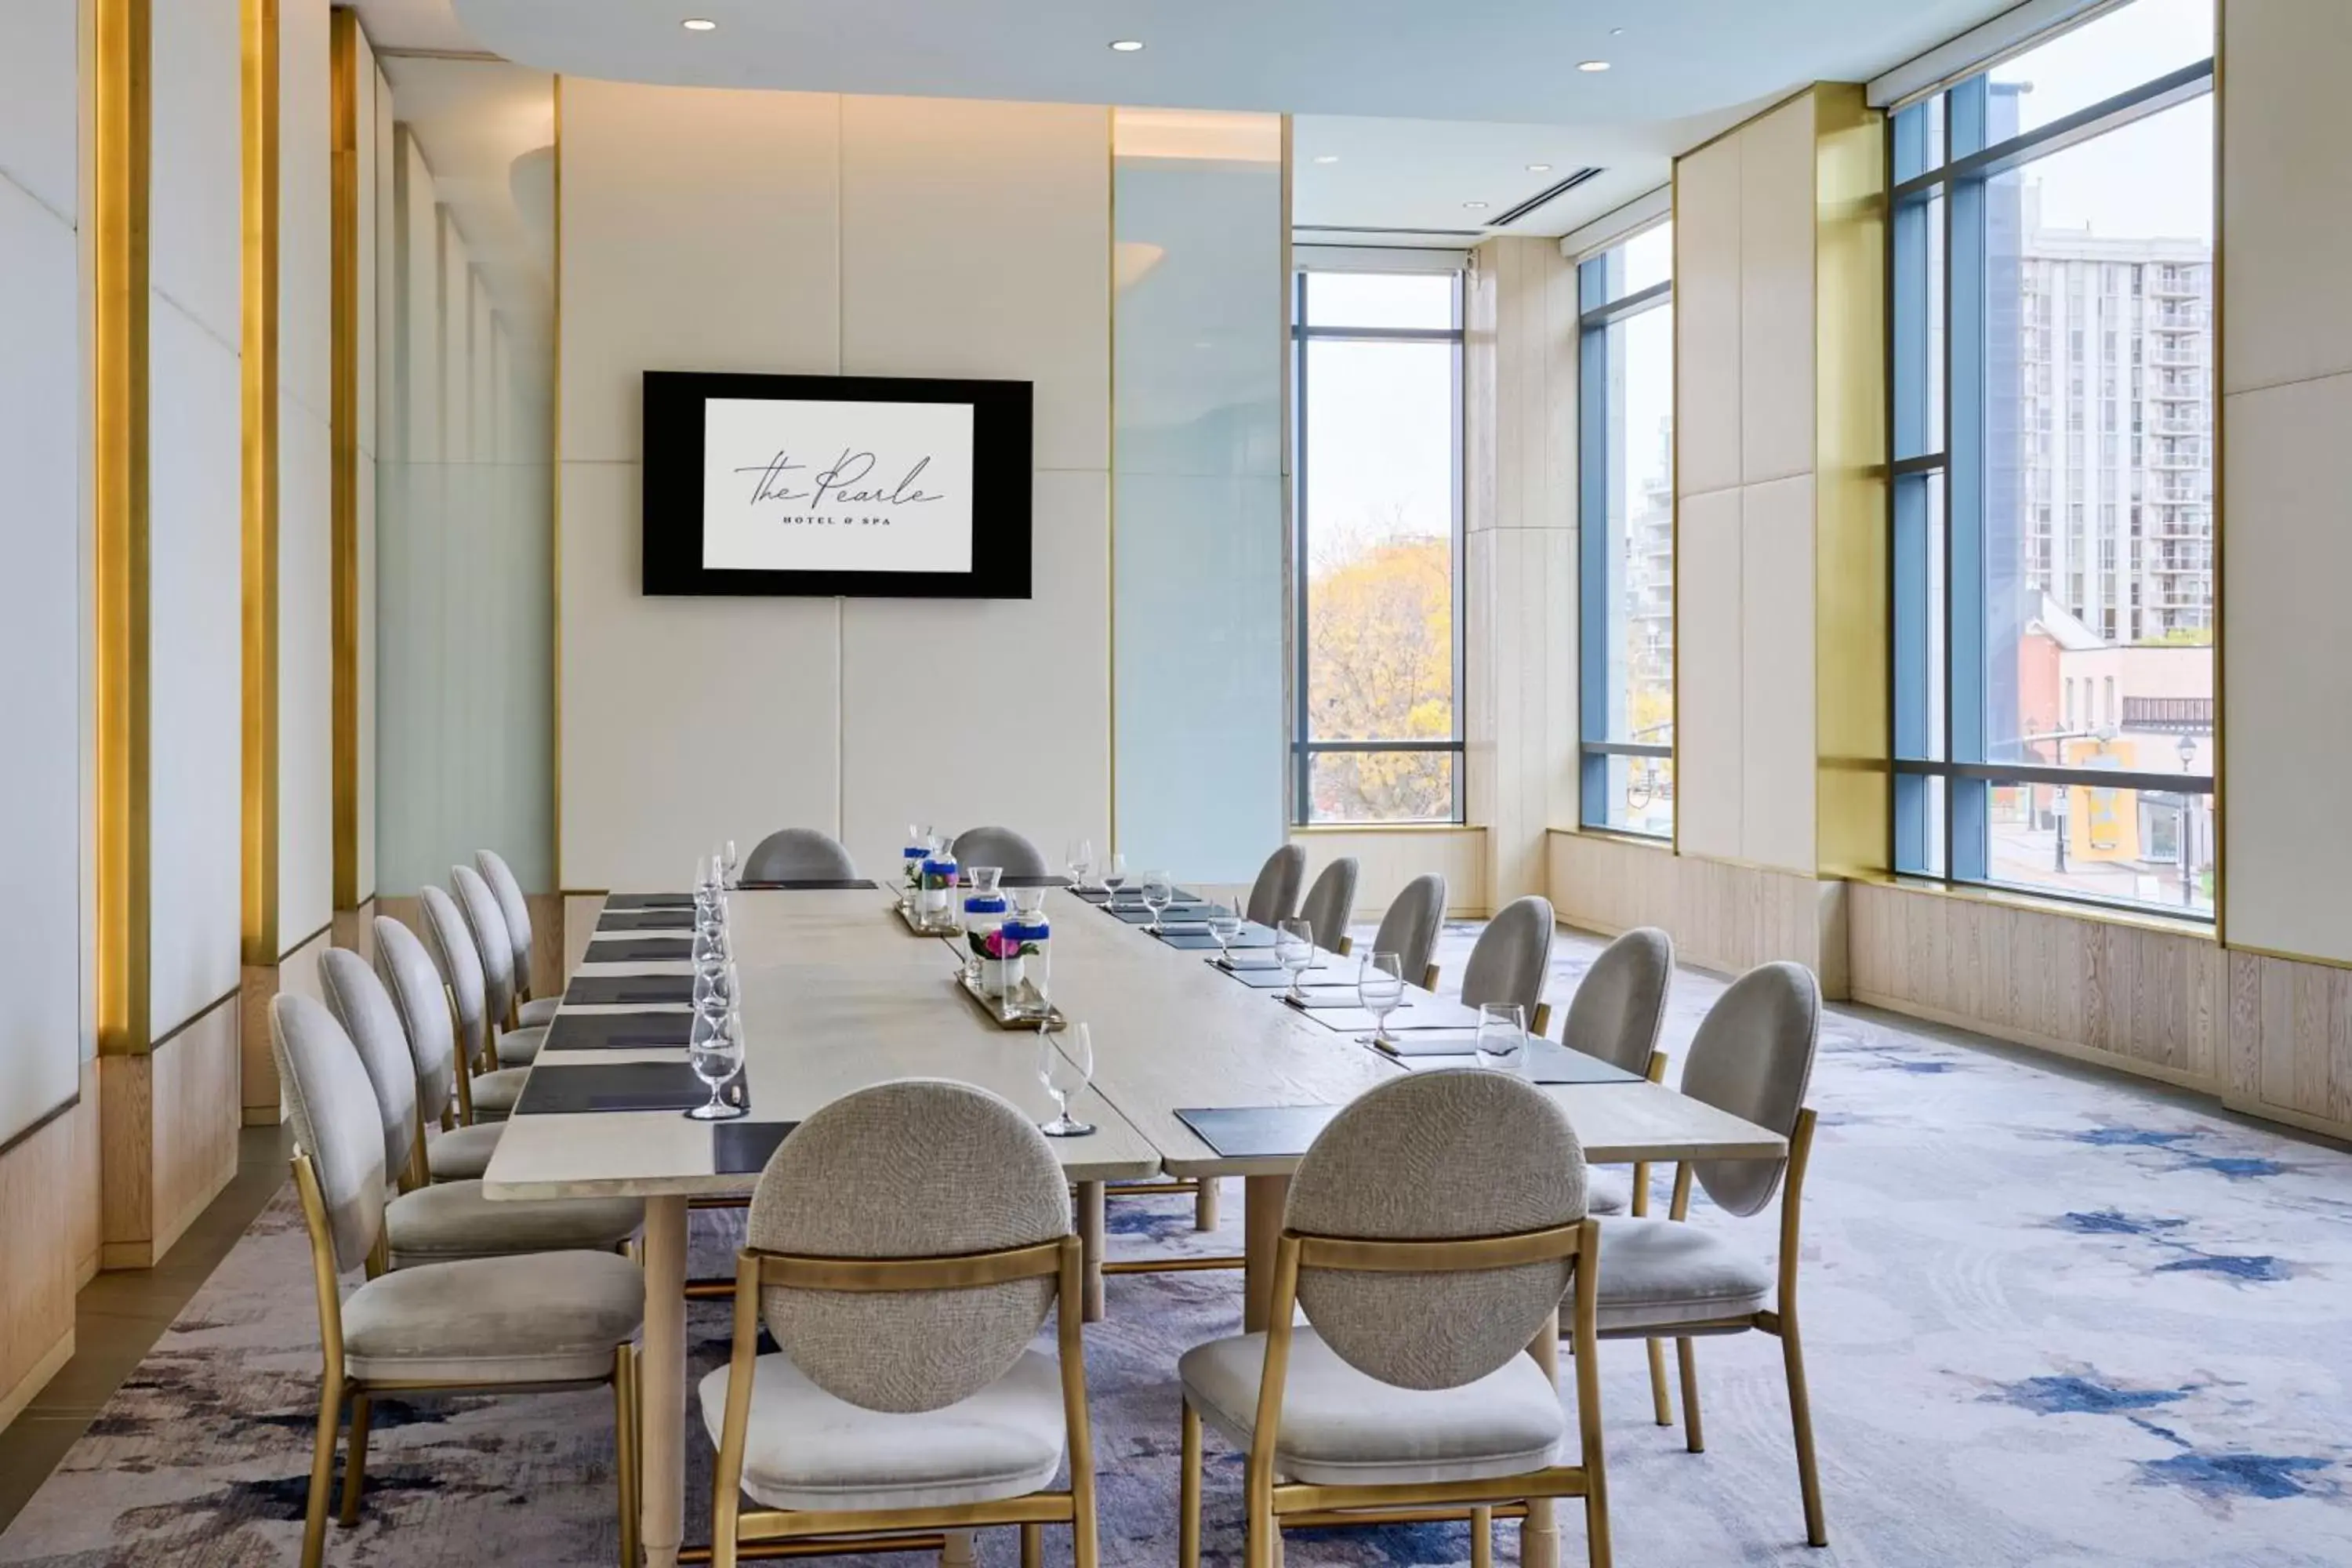 Meeting/conference room in The Pearle Hotel & Spa, Autograph Collection